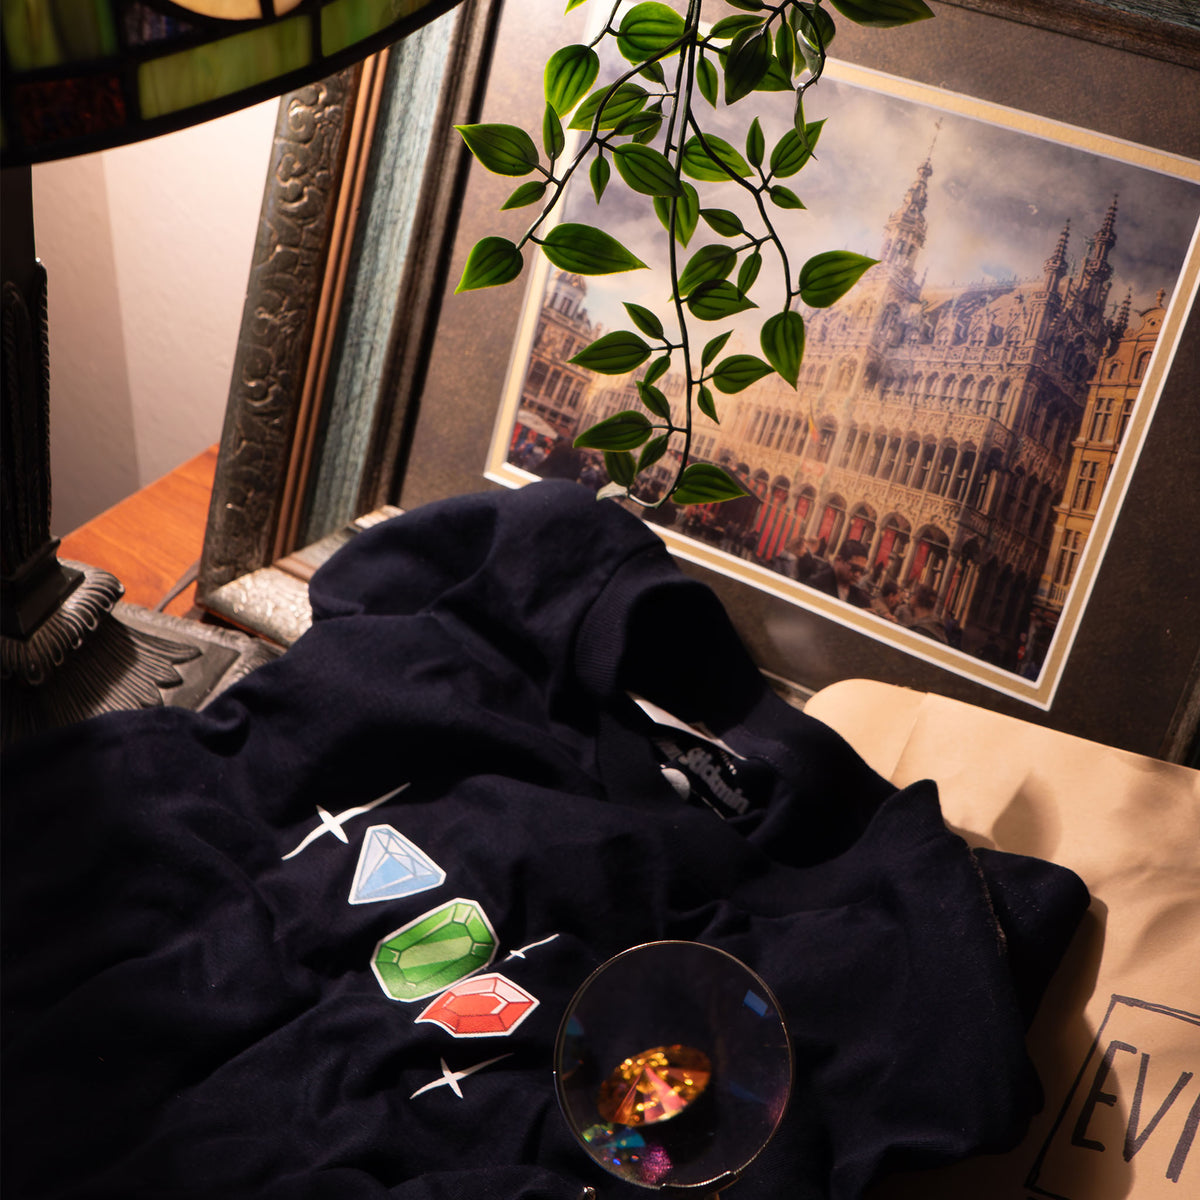 A lifestyle photograph close up of the Jewel Baron Tee. The Tee lies neatly on a desk covering up a manila envelope that says “evidence.” It’s surround by several objects including a framed photograph of an ornate building, a magnifying glass, Tiffany lamp, and plant vines.